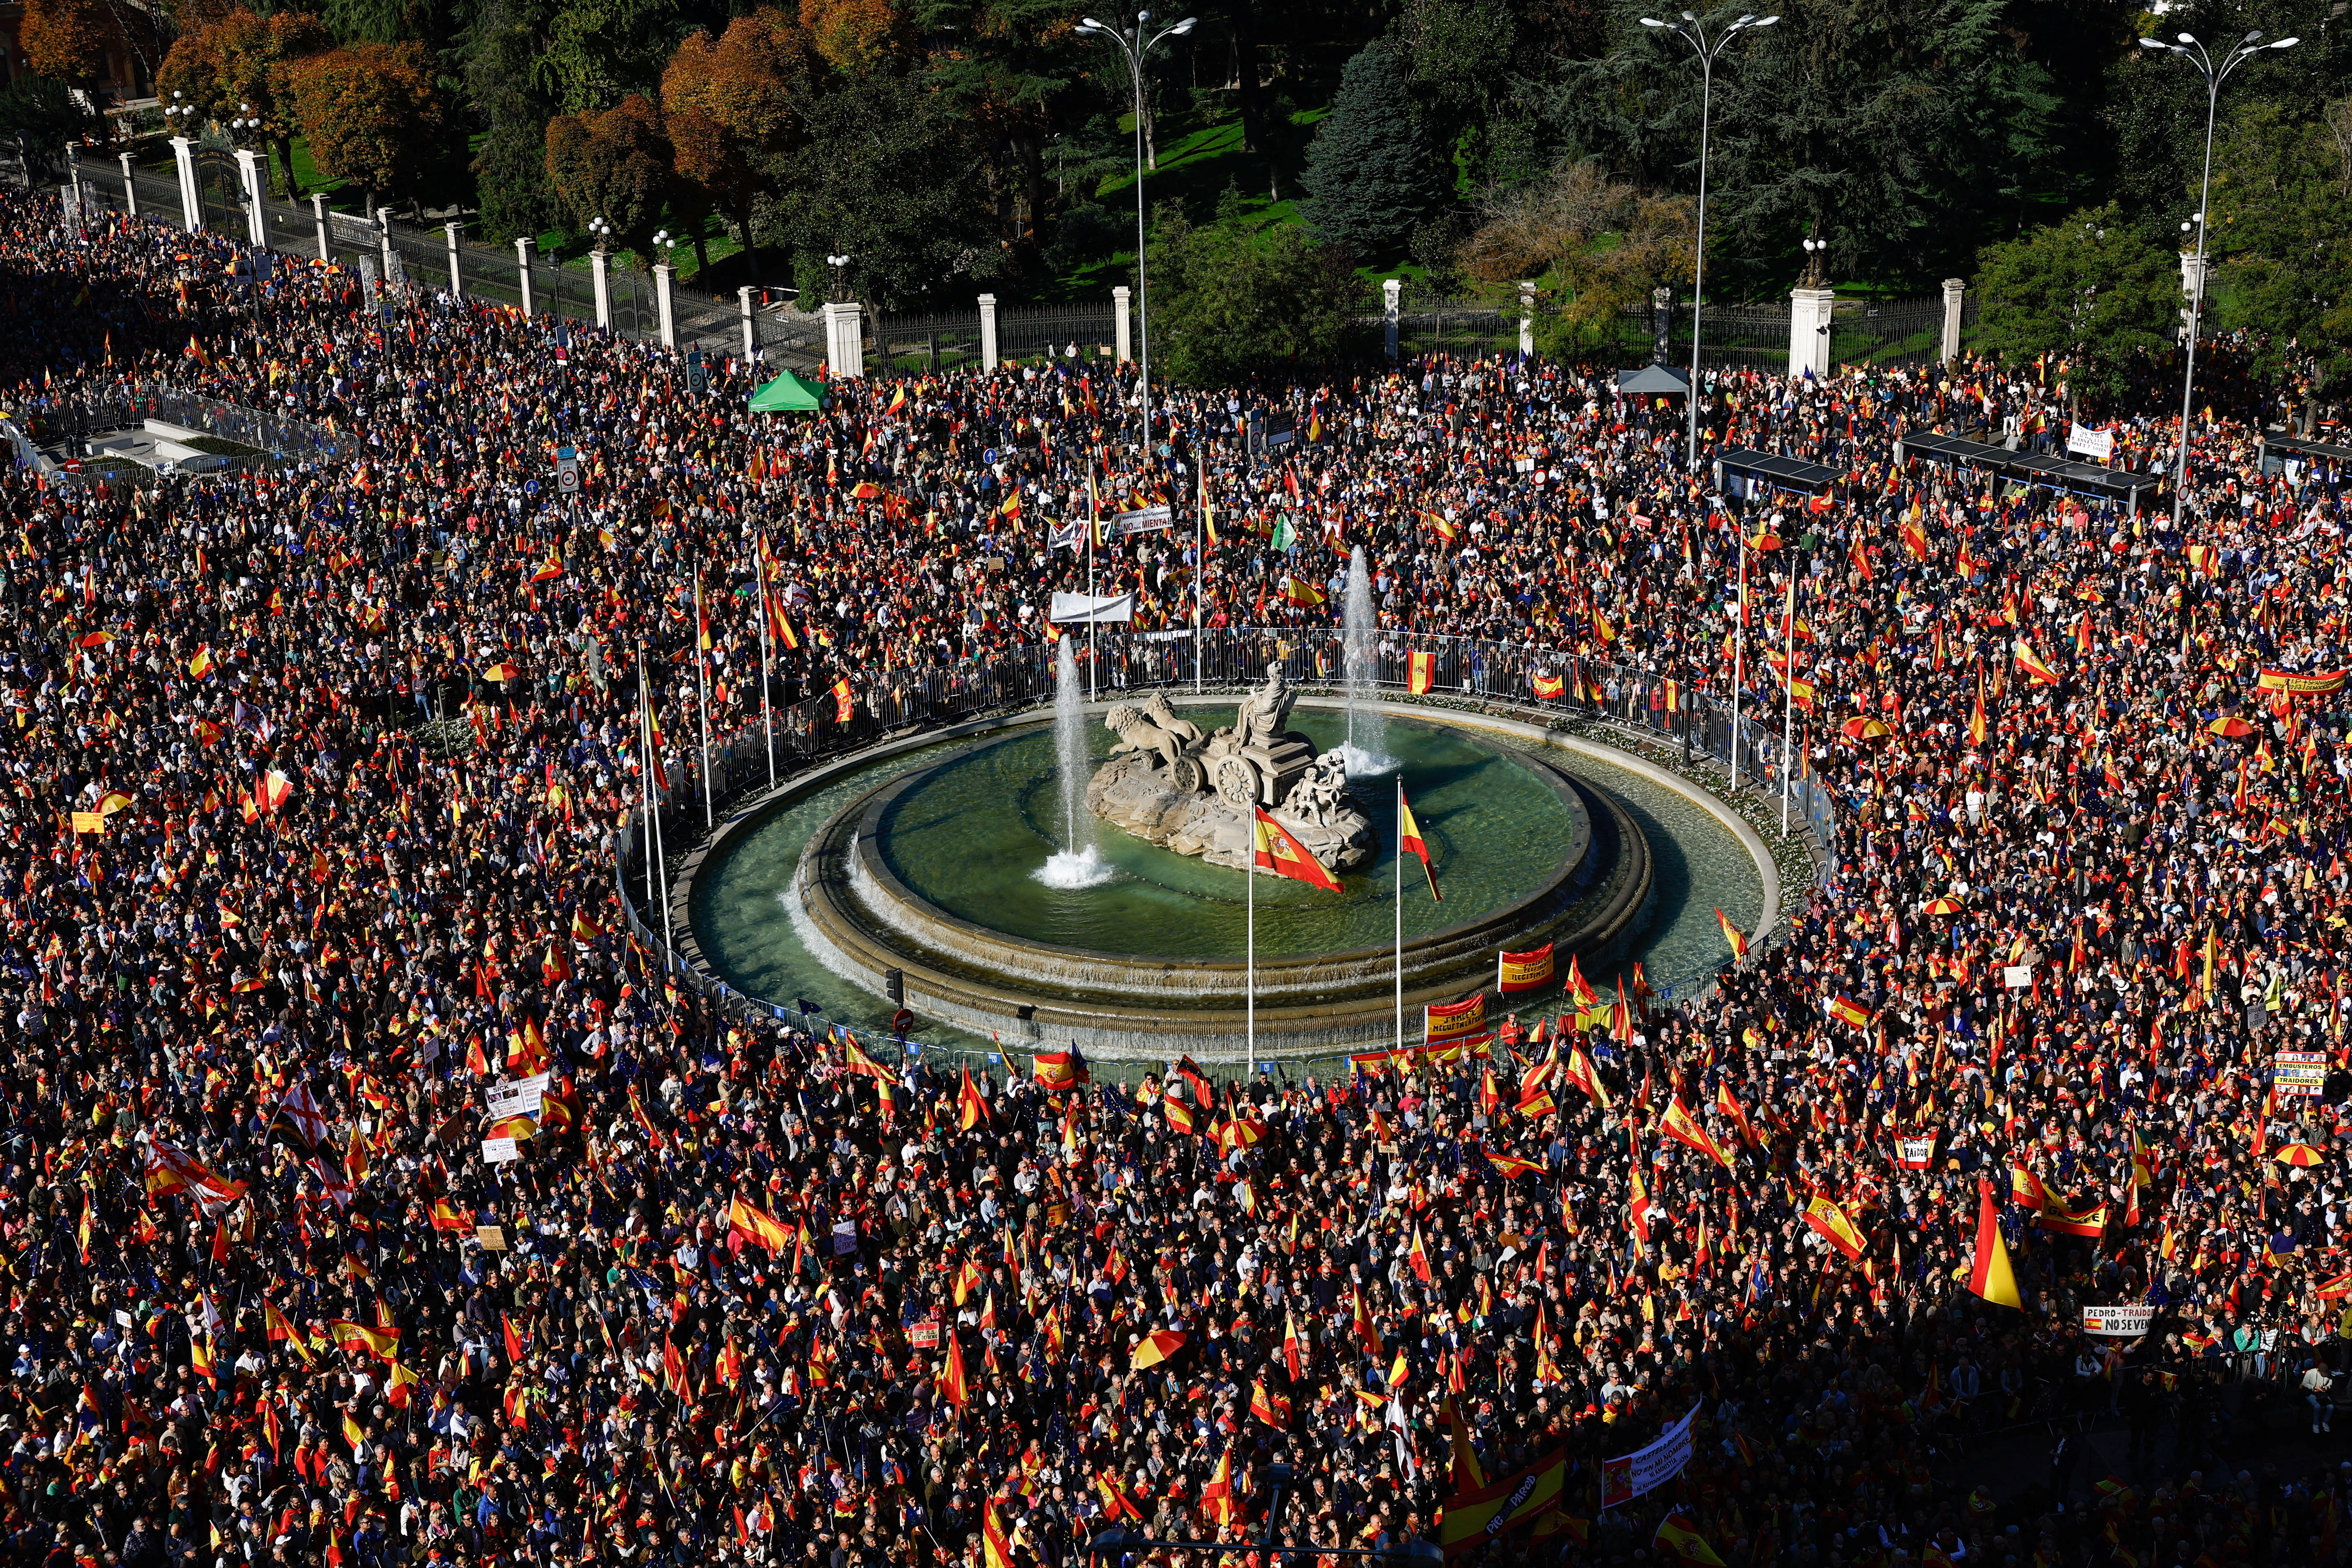 Large protests against Catalan amnesty deal in Madrid after PM sworn in, Politics News